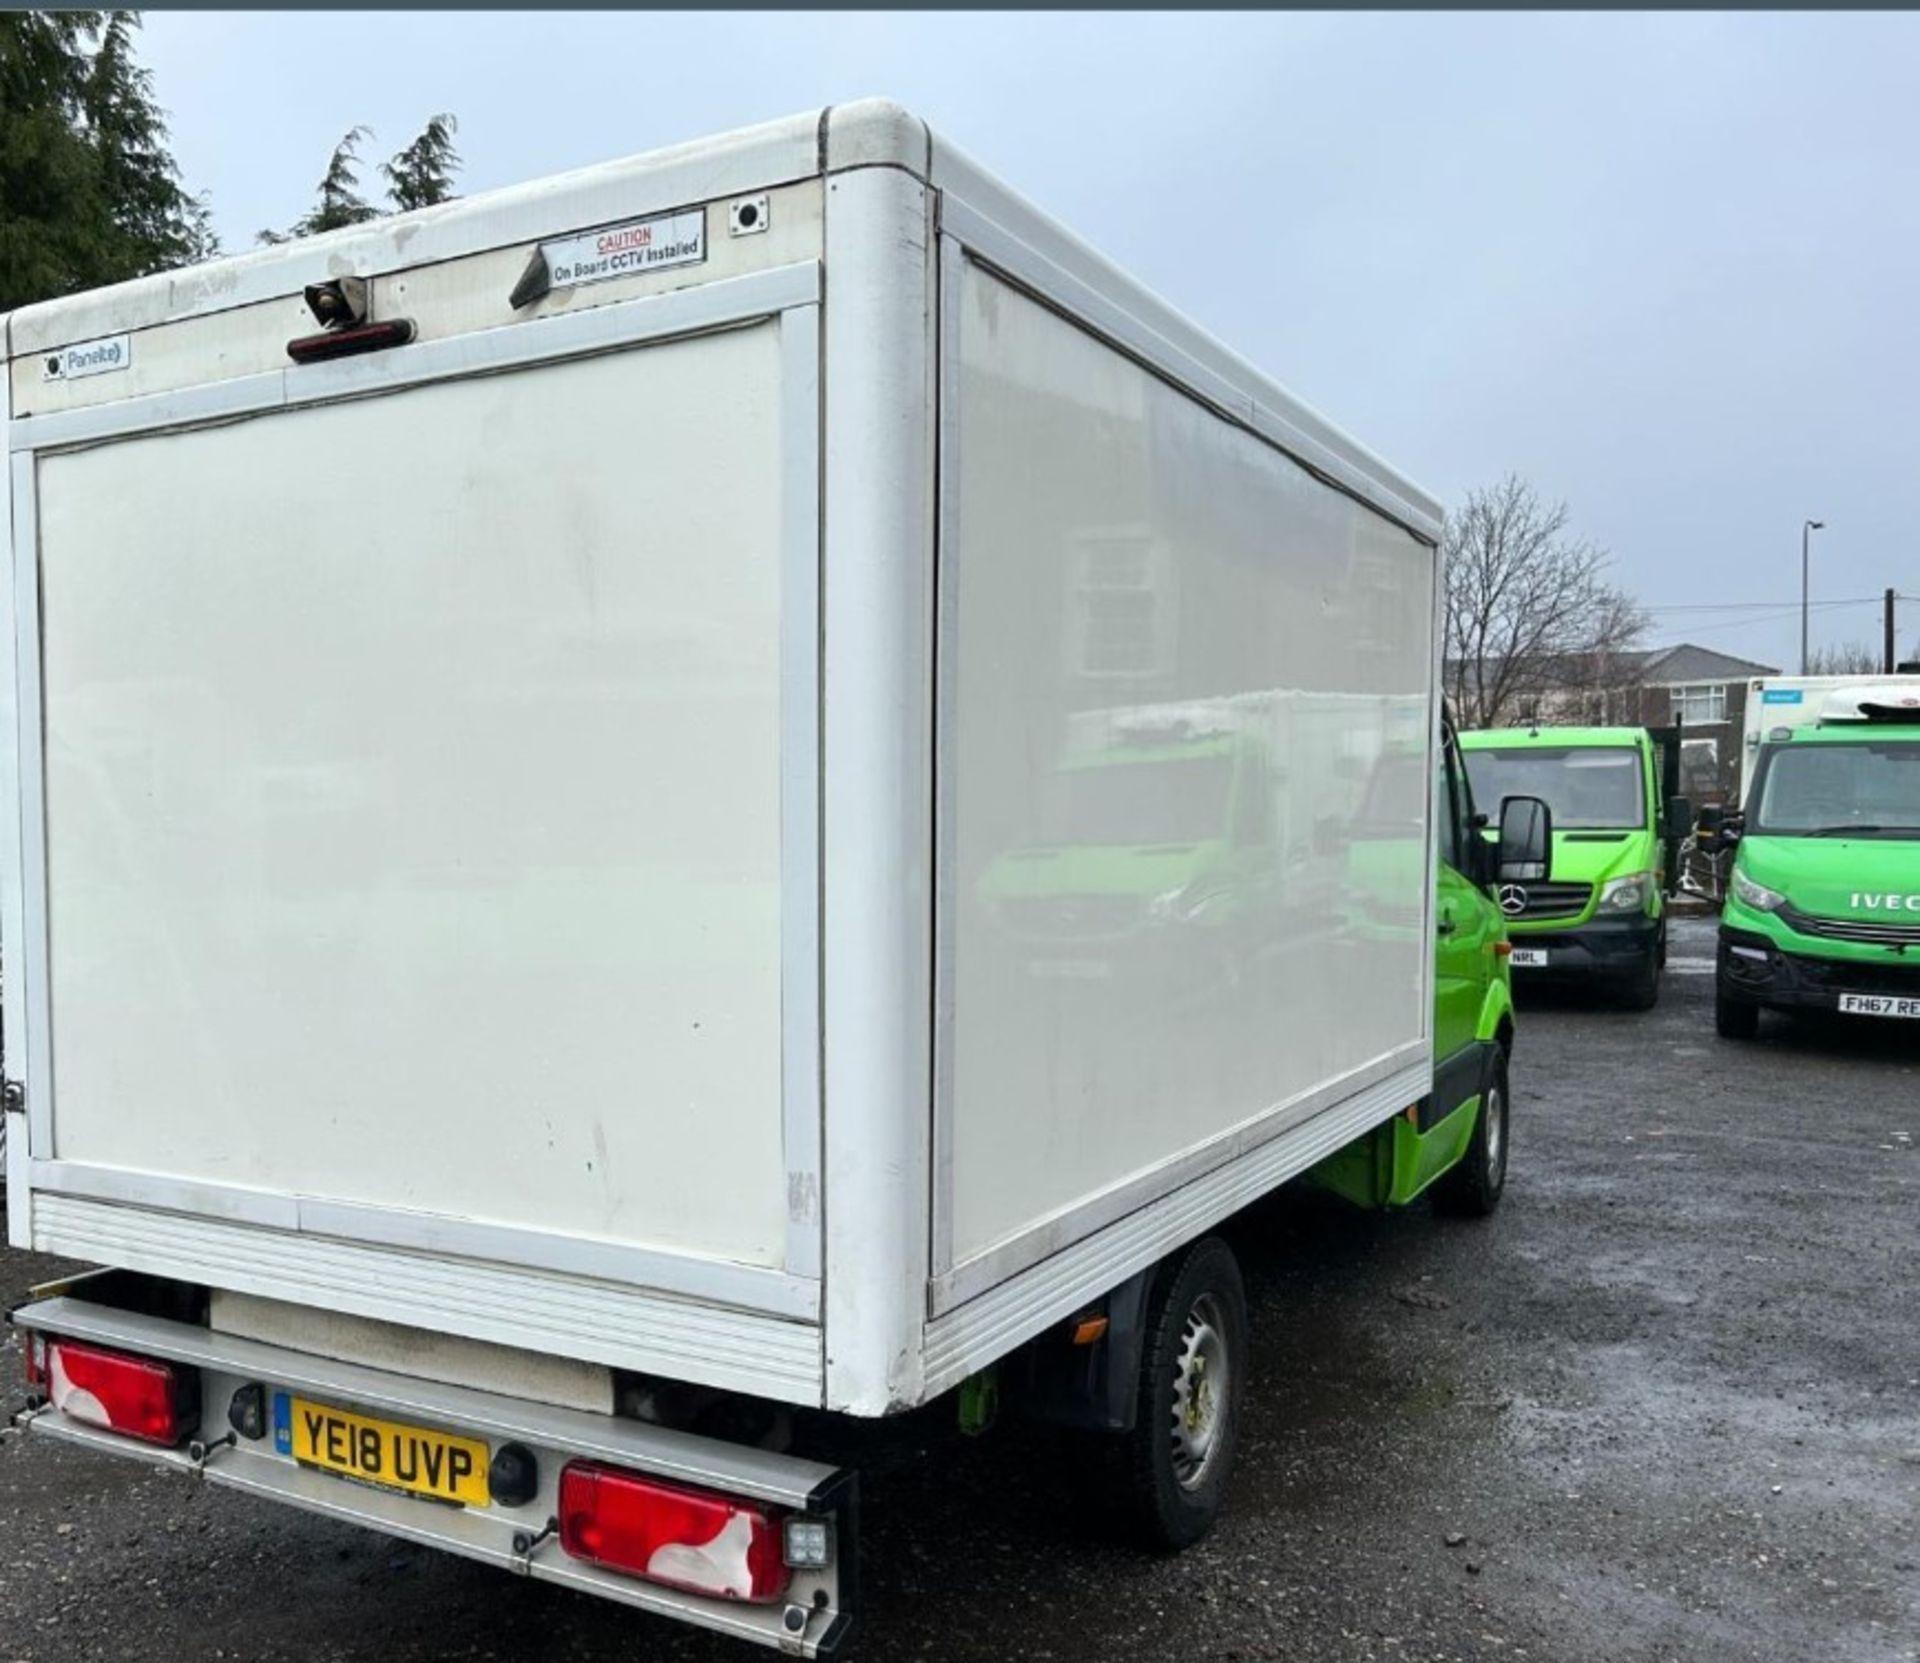 >>>SPECIAL CLEARANCE<<< 2018 MERCEDES-BENZ SPRINTER 314 CDI FRIDGE FREEZER CHASSIS CAB - Image 2 of 12